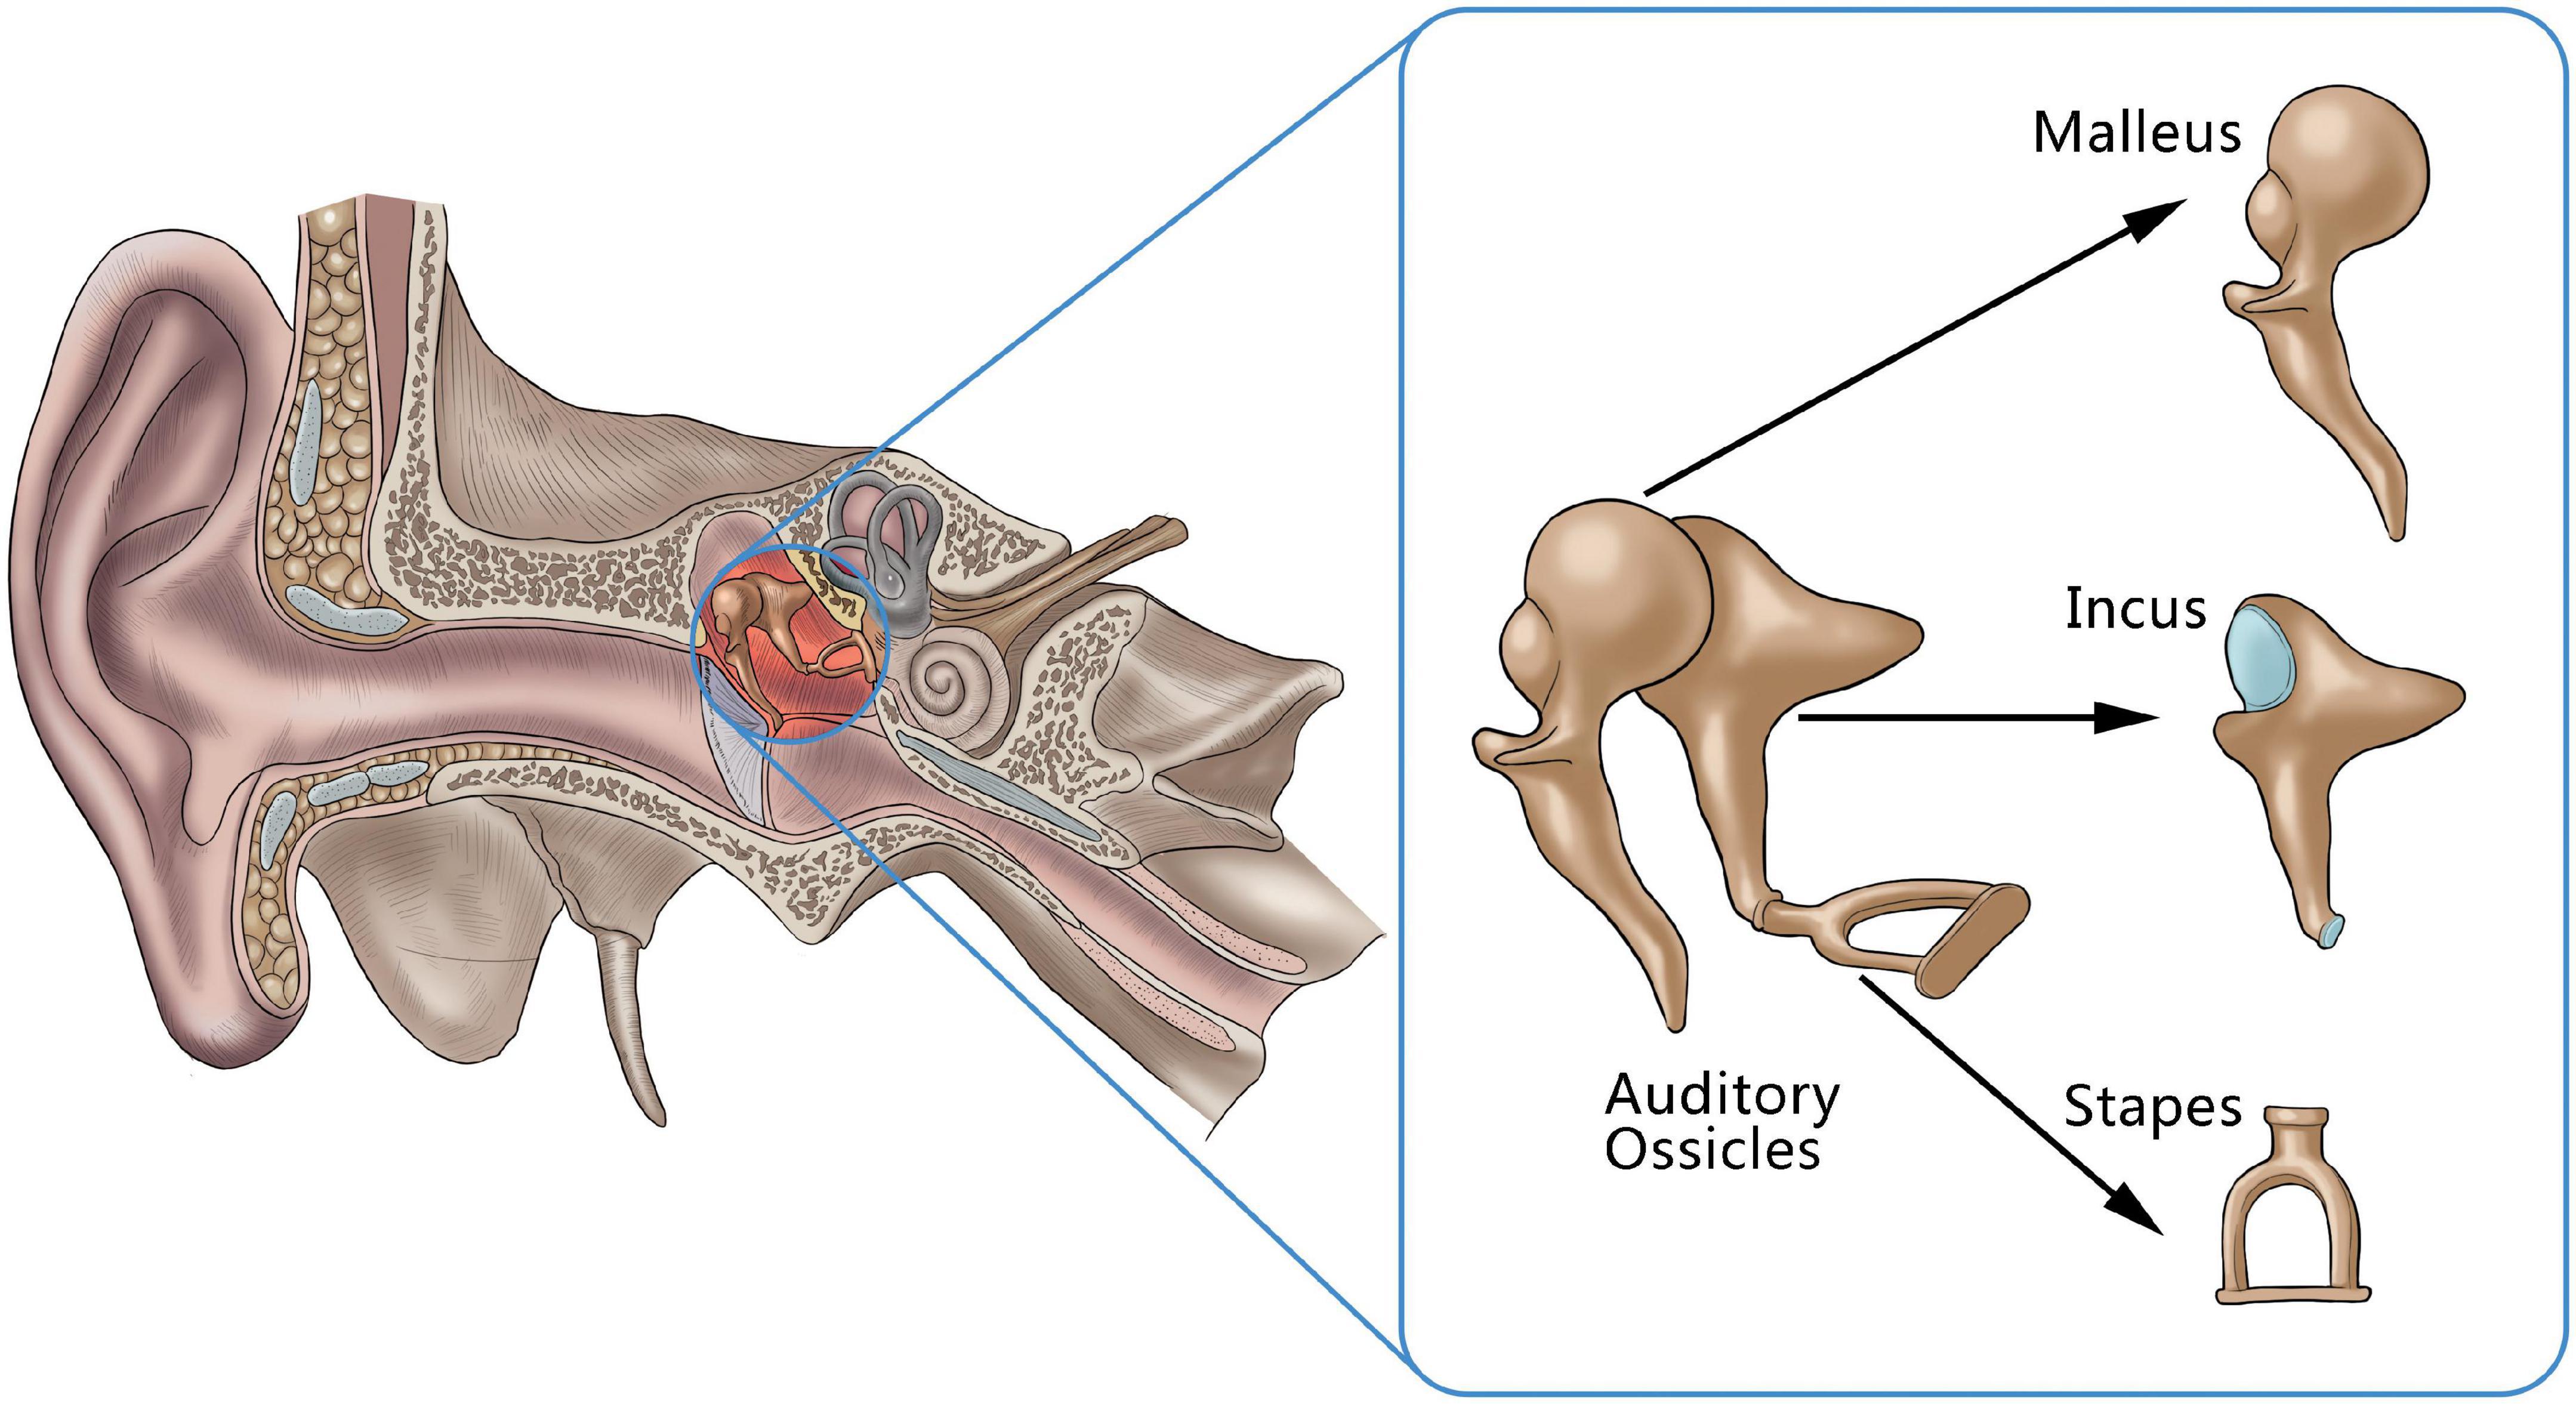 Auditory ossicles - malleus, incus, and stapes Diagram